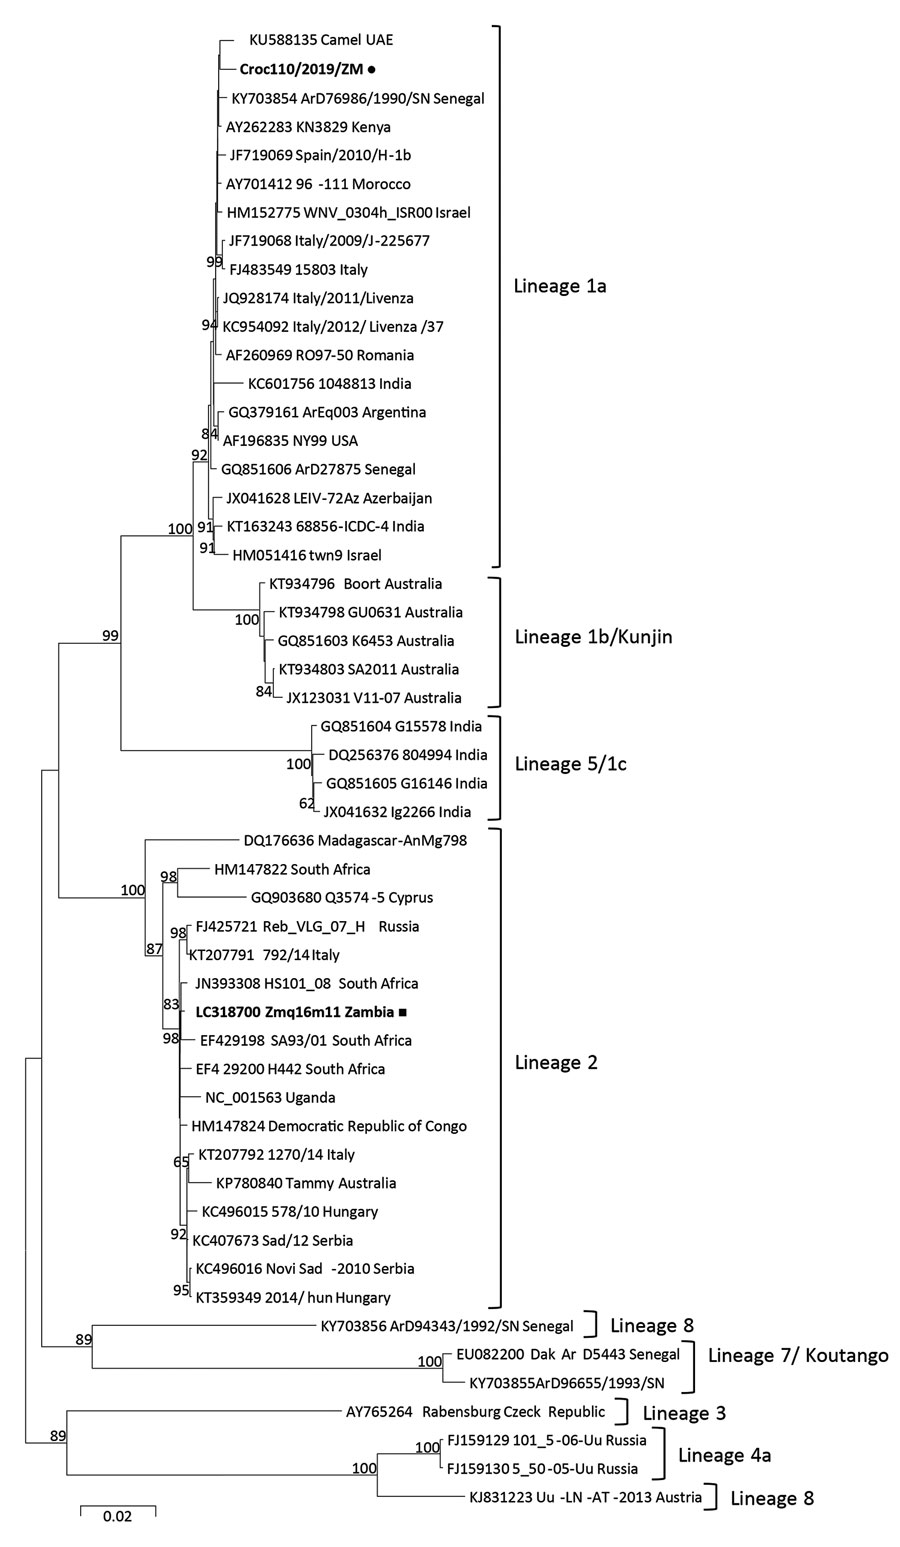 Phylogenetic tree of complete polyprotein amino acid sequences of West Nile virus (WNV) from farmed crocodiles, Zambia (black dot), and reference sequences. Phylogenetic analysis was conducted by using the maximum likelihood method based on the JTT matrix-based model with 1,000 bootstrap replicates using MEGA6 software (https://www.megasoftware.net). Bootstrap values &gt;60% are shown next to the branches. The analysis involved 52 amino acid sequences; there were a total of 3,415 positions in th